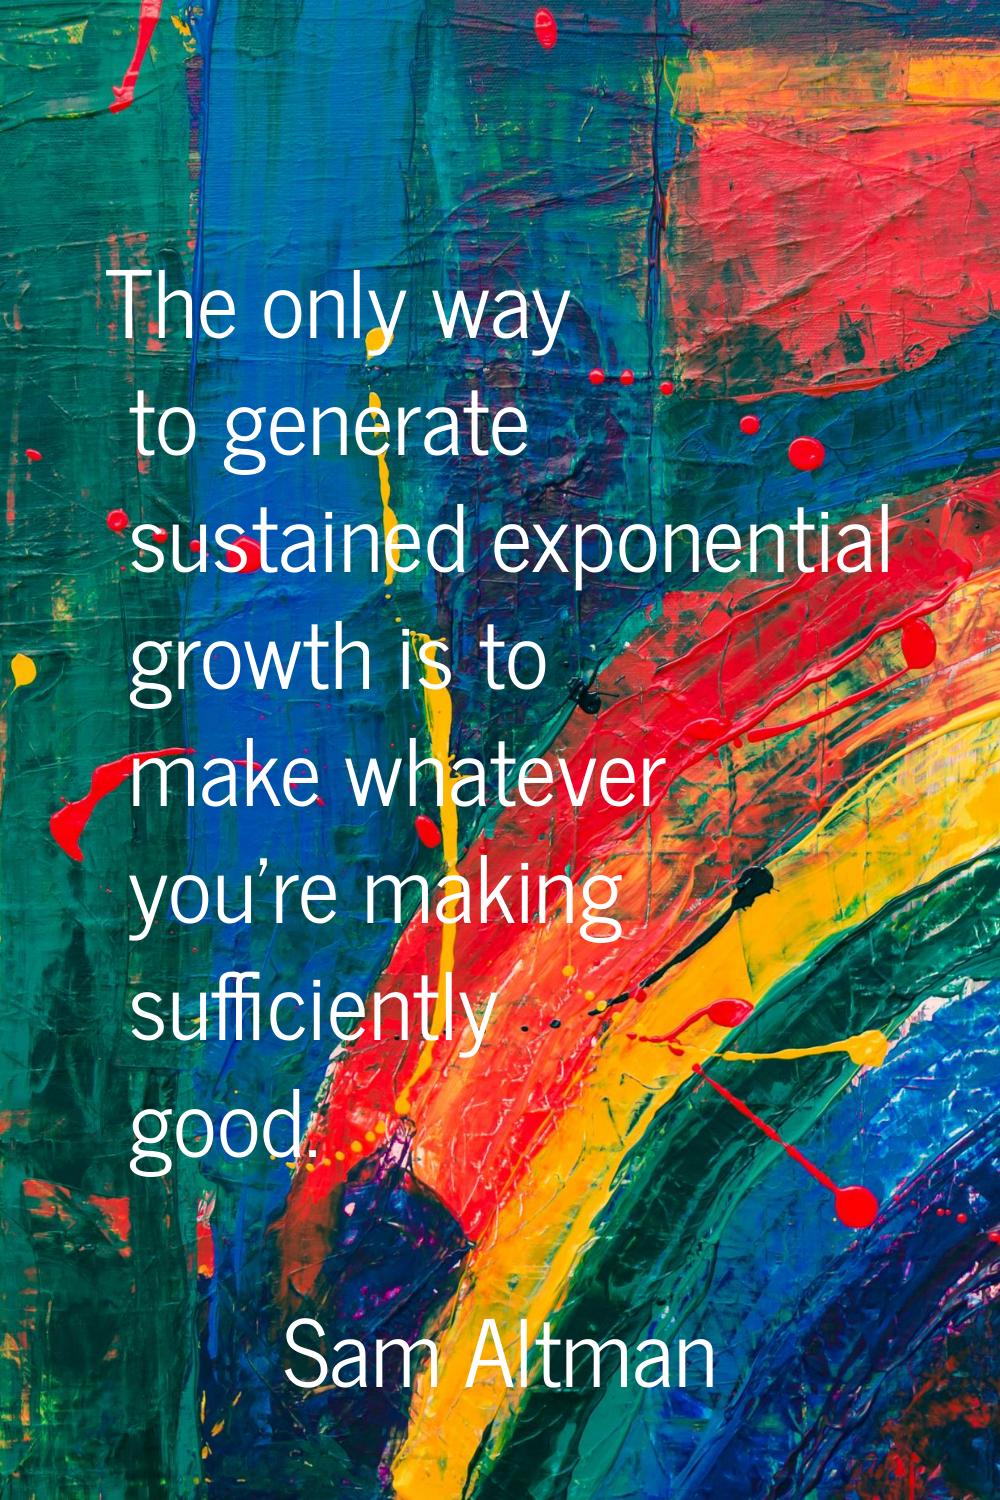 The only way to generate sustained exponential growth is to make whatever you're making sufficientl